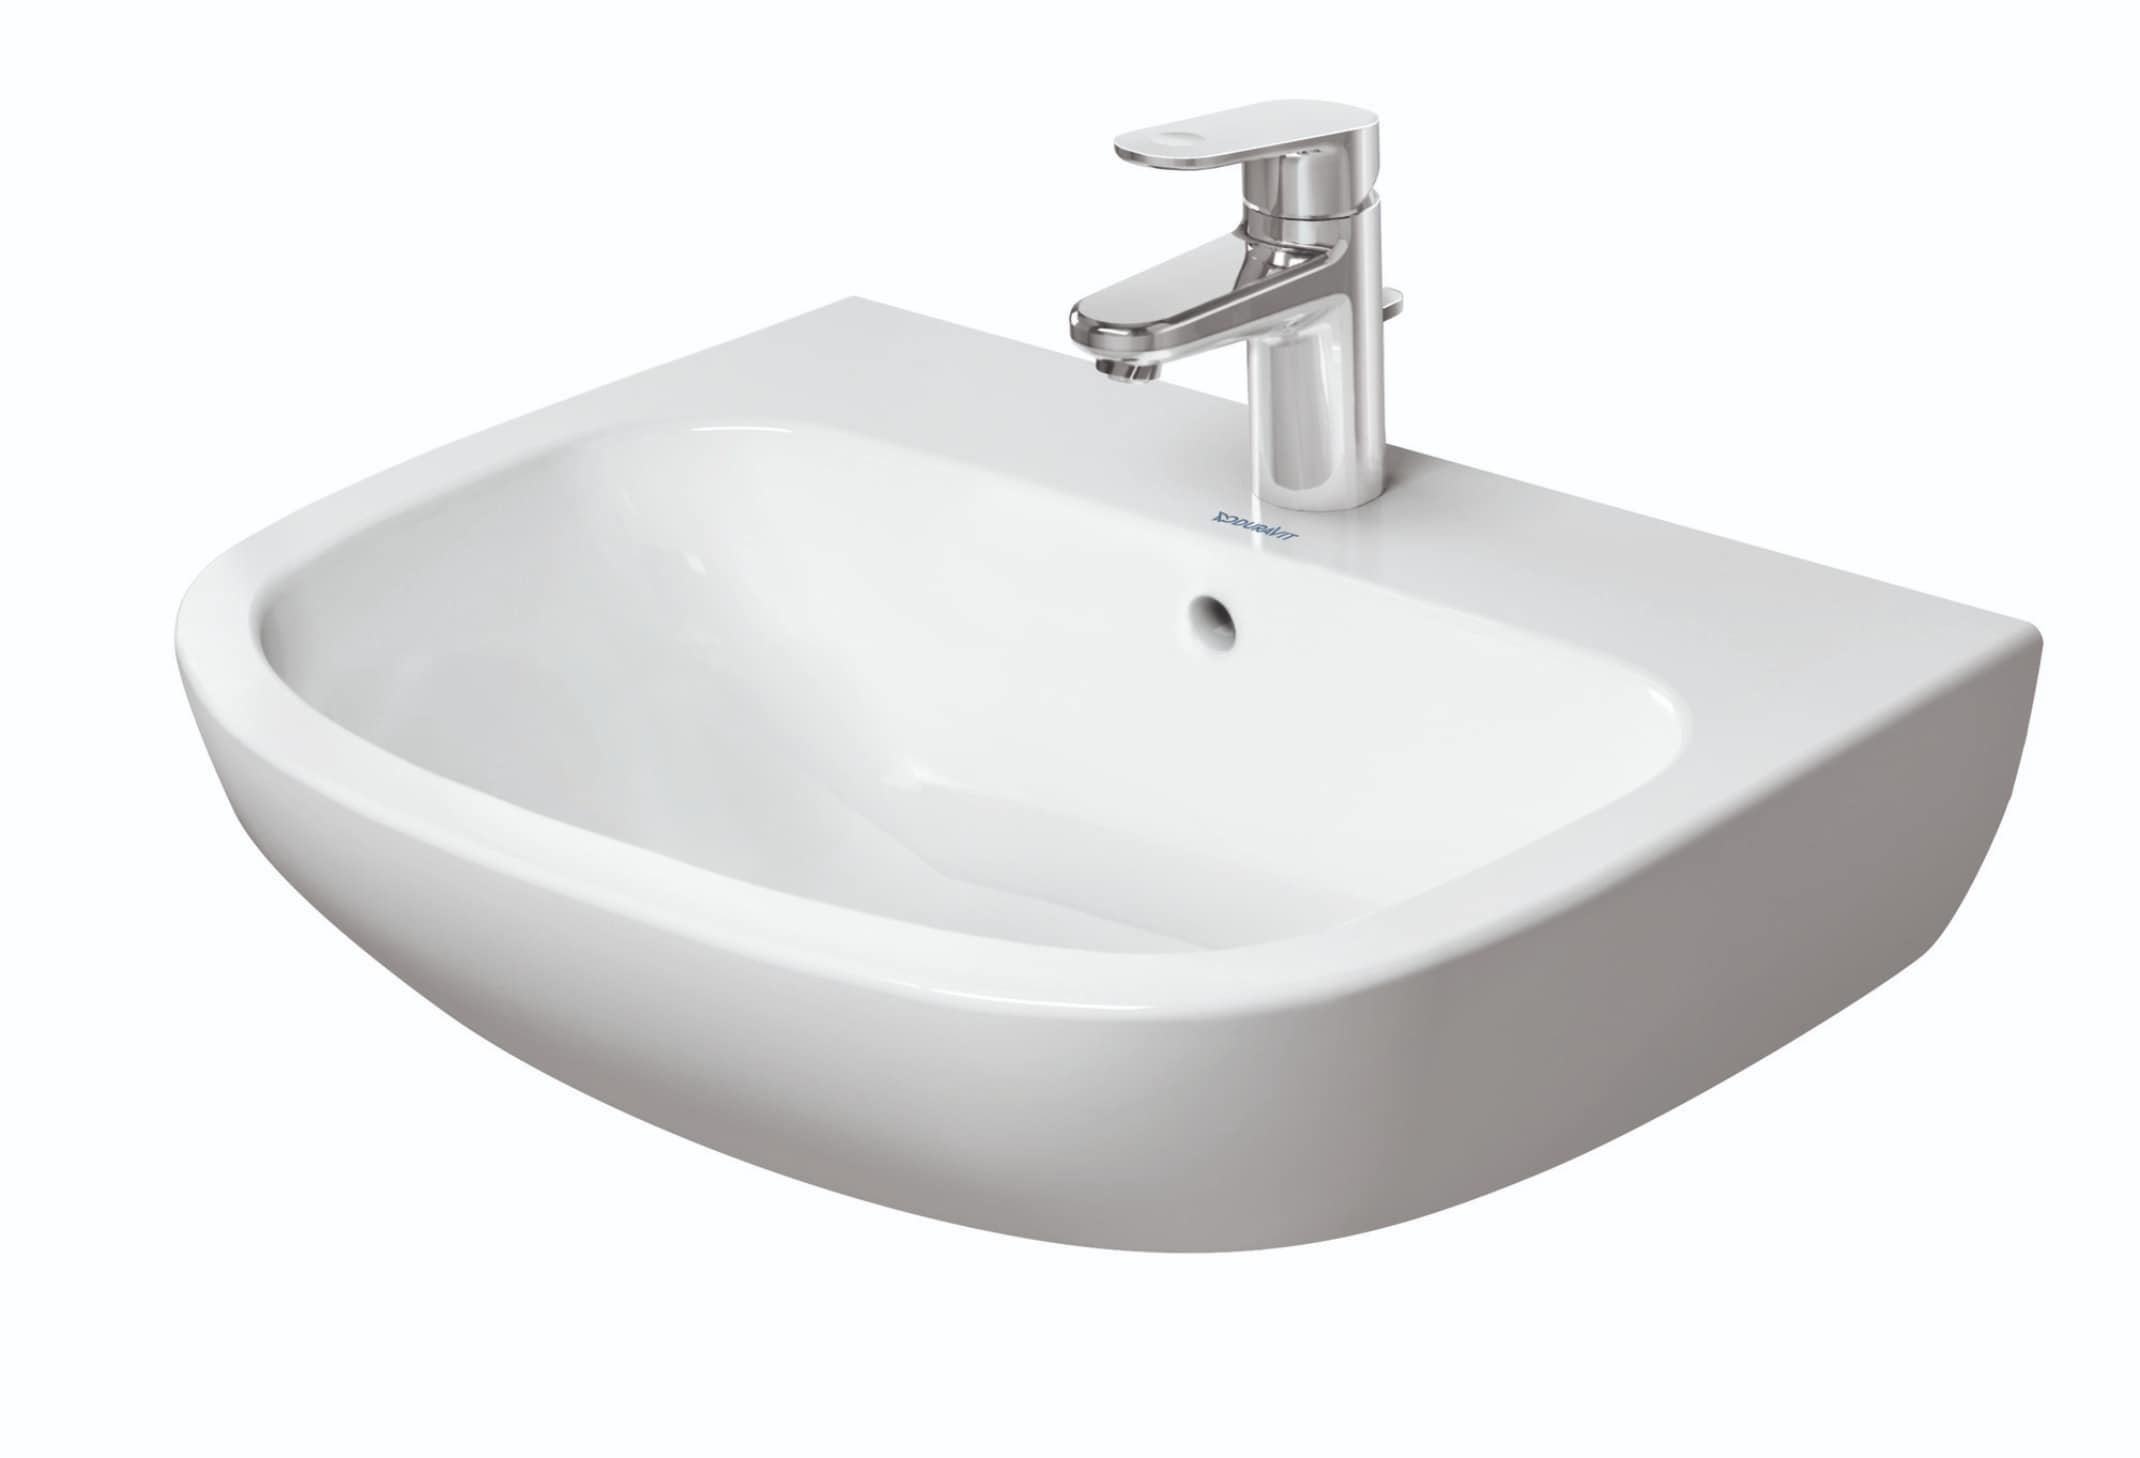 D-Code White Ceramic Wall-mount Semi-circle Modern Bathroom Sink x 18.125-in) the Bathroom Sinks department at Lowes.com